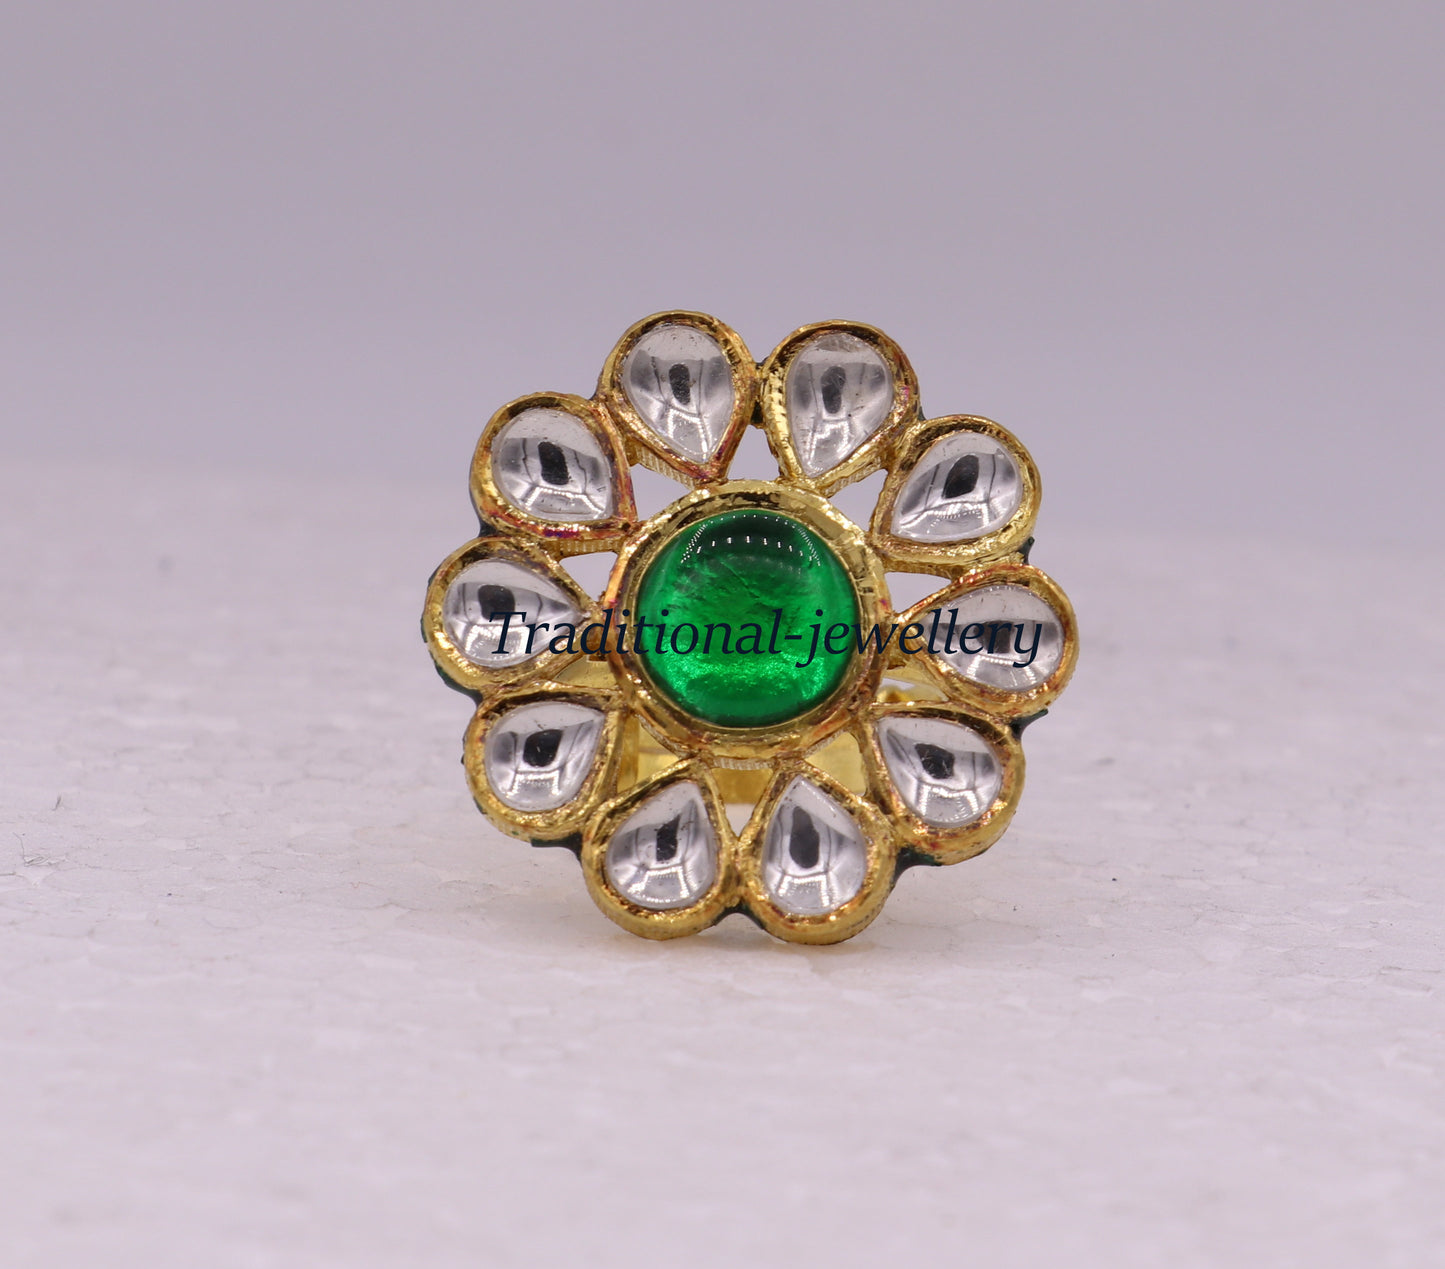 Vintage antique handmade 22k yellow gold gorgeous adjustable ring with green onyx wedding rings antique women's jewelry - TRIBAL ORNAMENTS